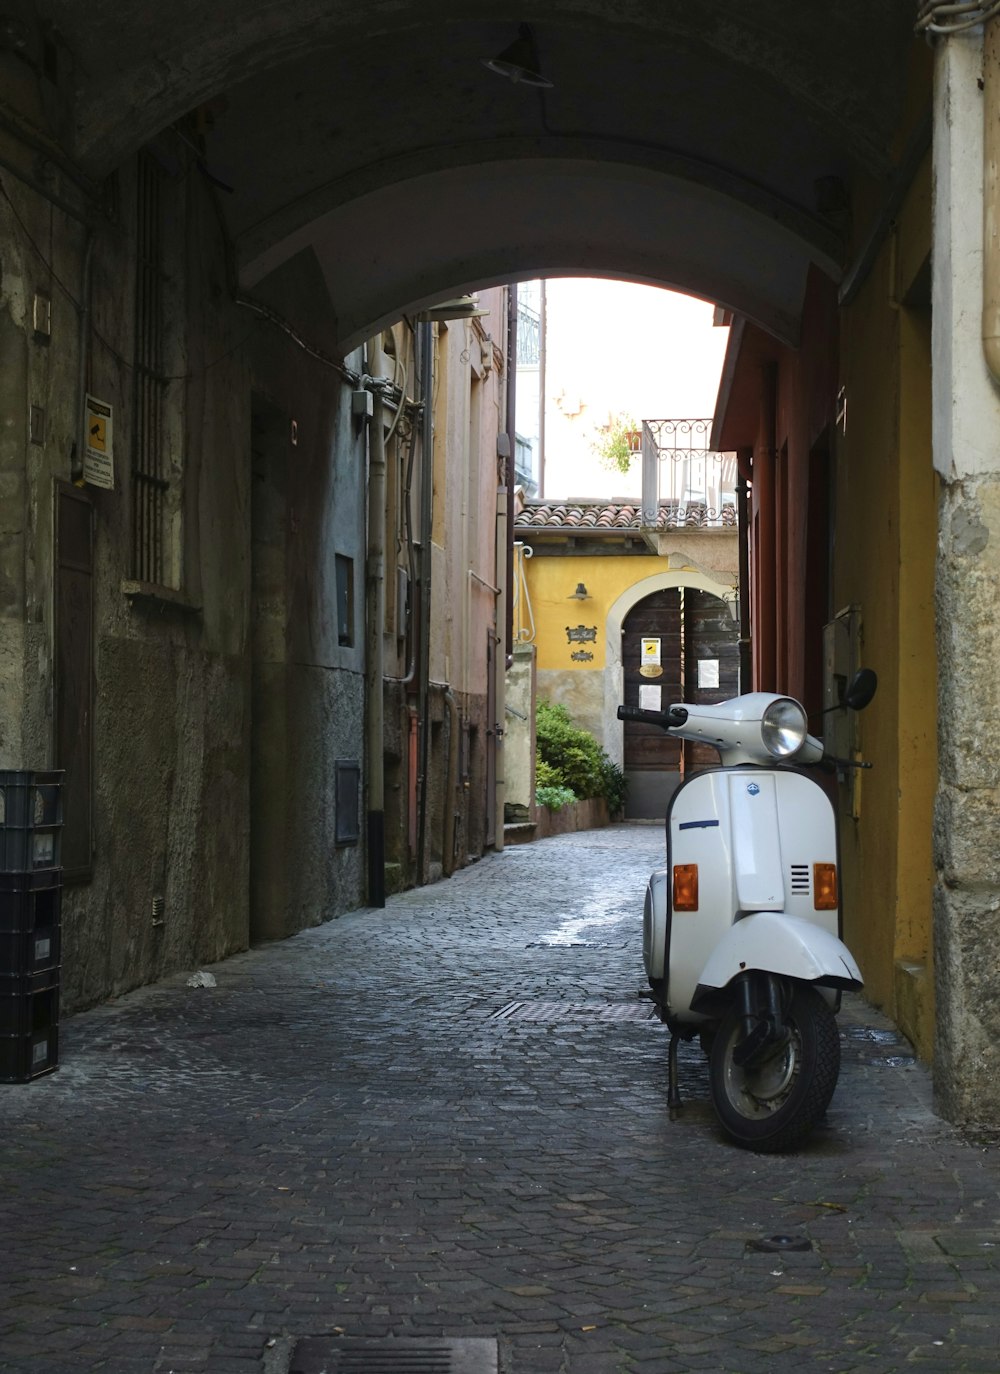 a motor scooter is parked in an alley way